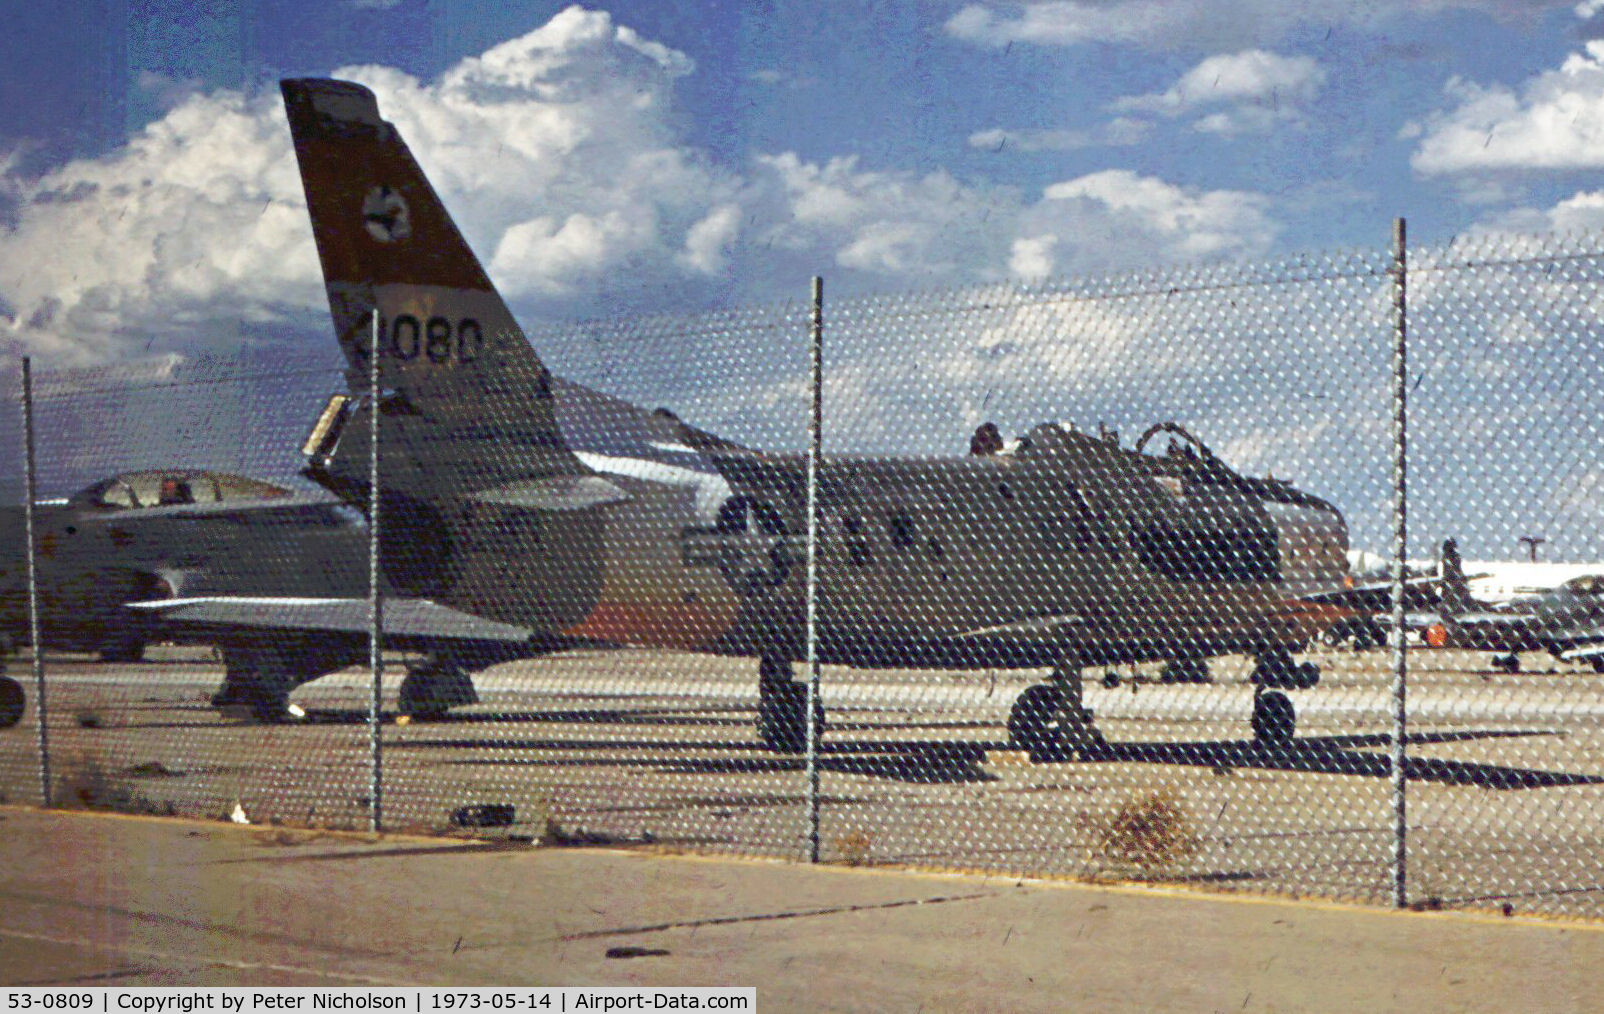 53-0809, 1953 North American F-86L Sabre C/N 201-253, Former Iowa Air National Guard F-86L Sabre as seen at Tucson in May 1973.